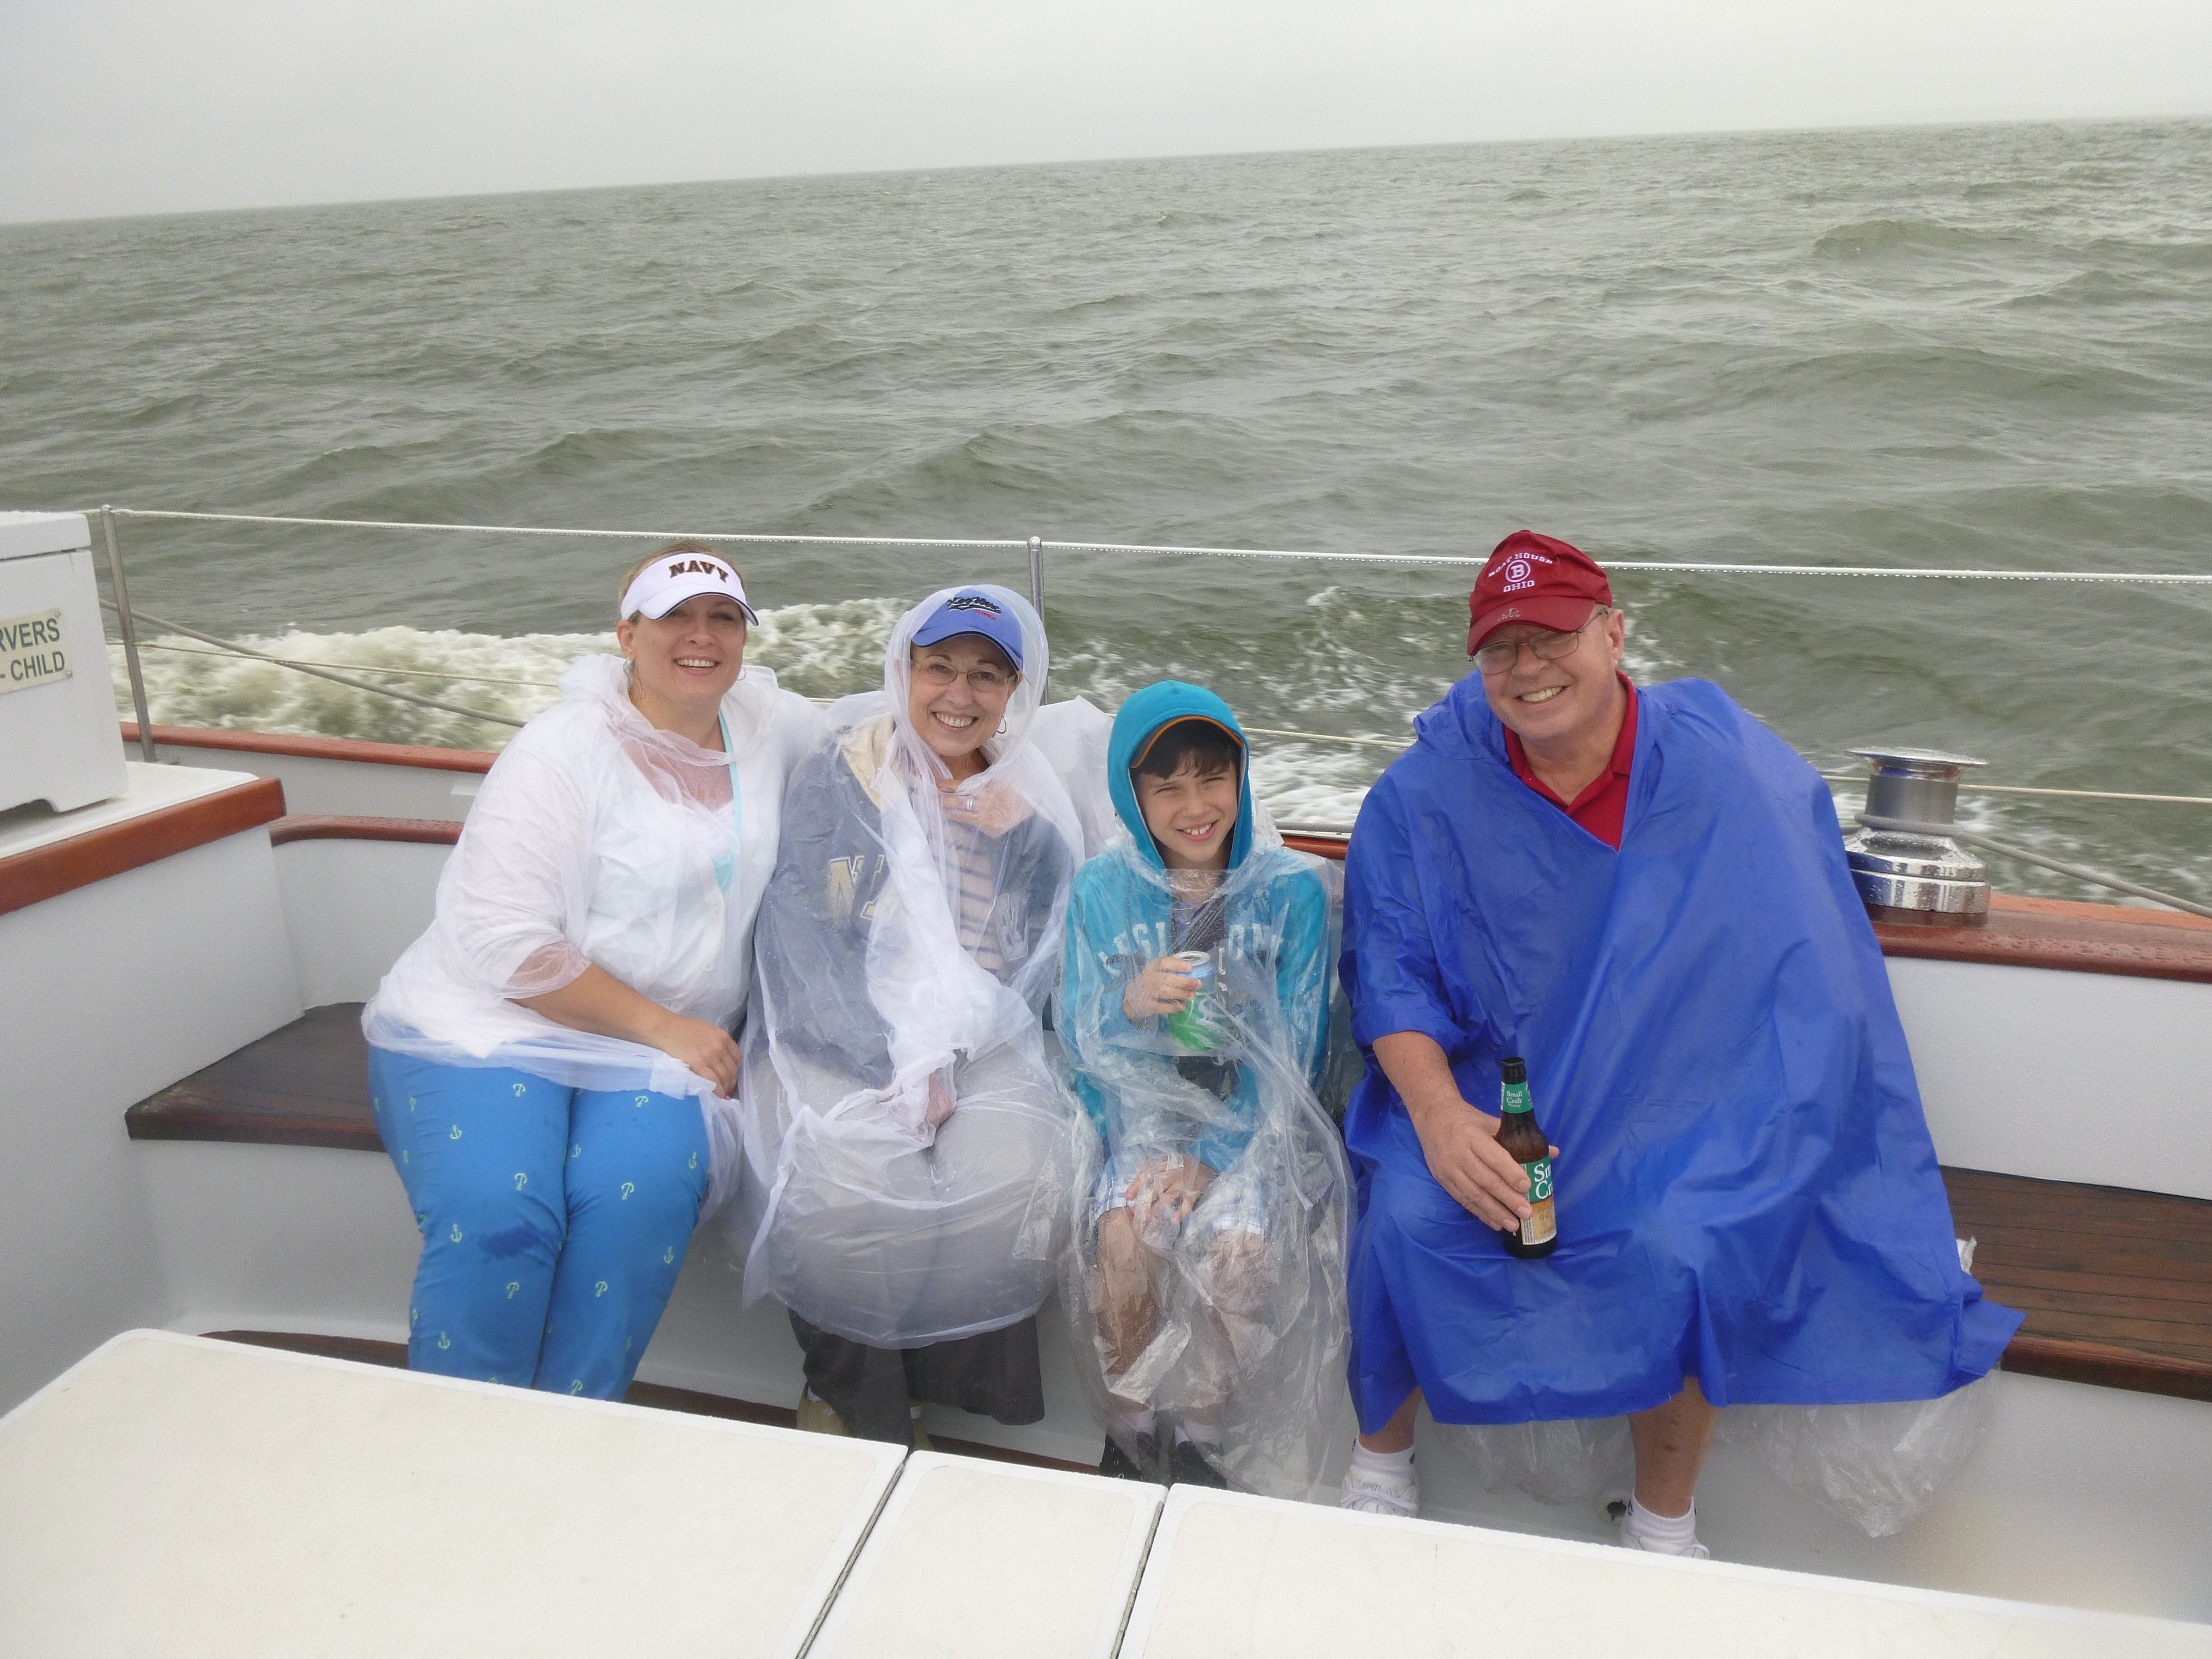 The Renninger Family in ponchos on a rainy day